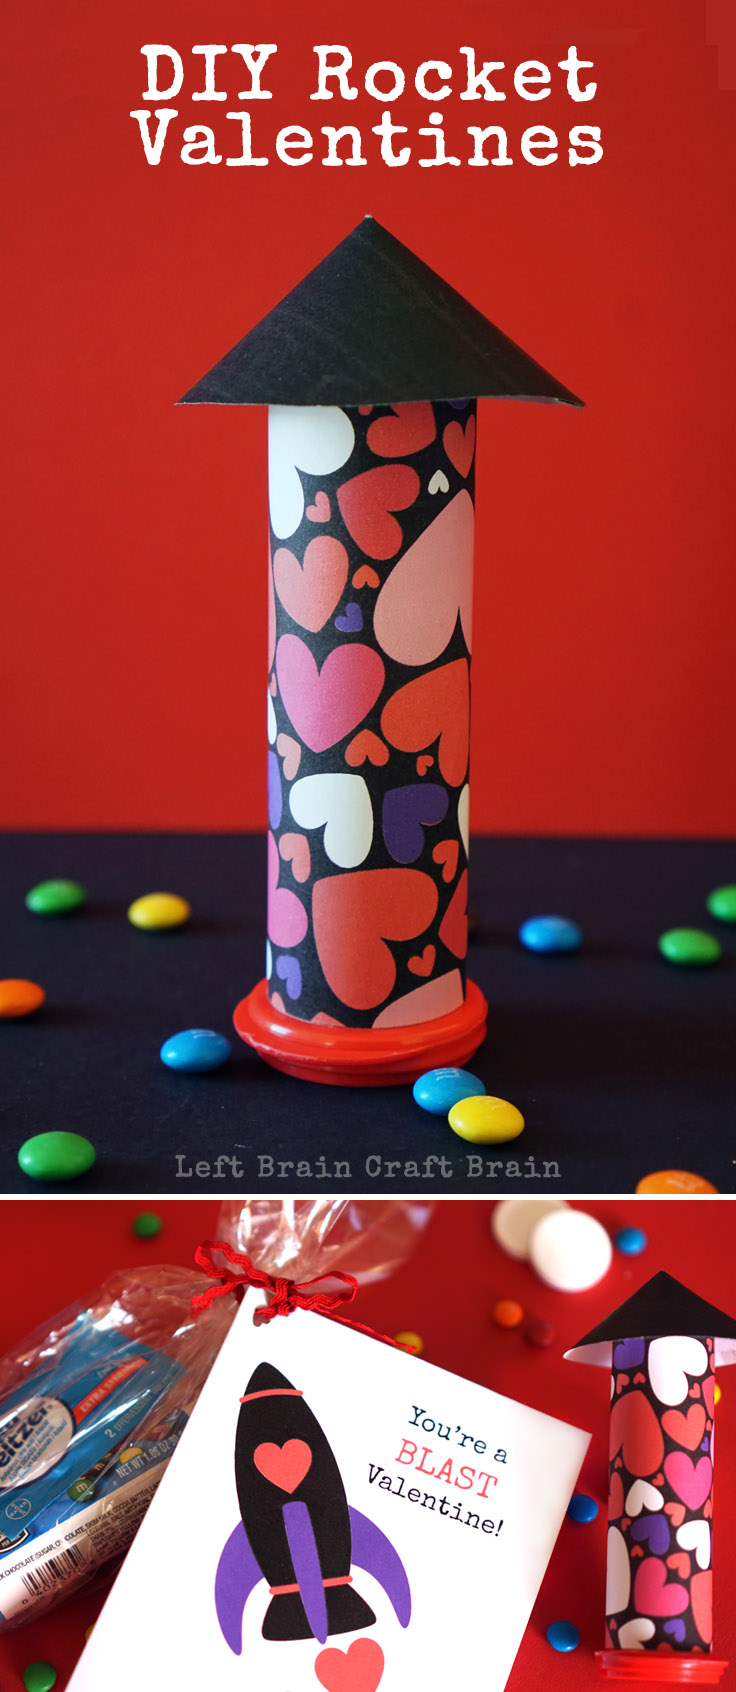 This year give fun, flying DIY Rocket Valentines. Wrap up M&M's, Alka Seltzer and a free printable card for an awesome Valentine's Day STEM project for kids.